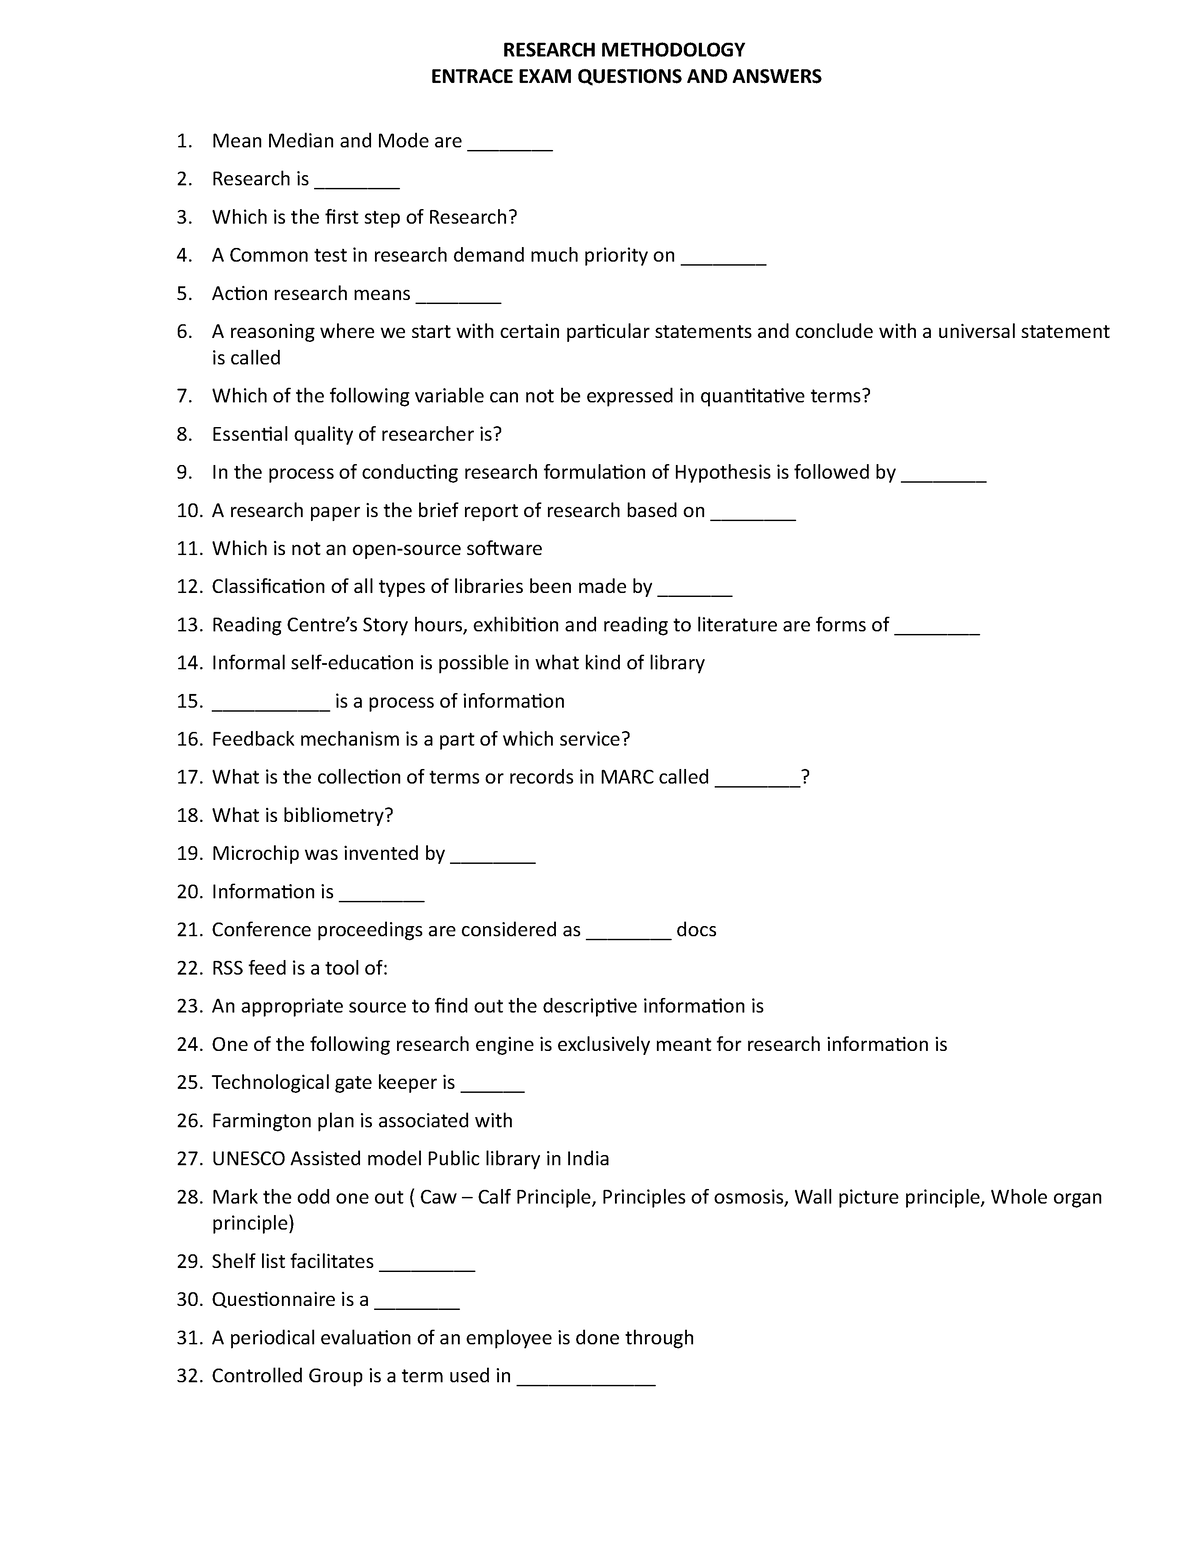 research methods test questions and answers